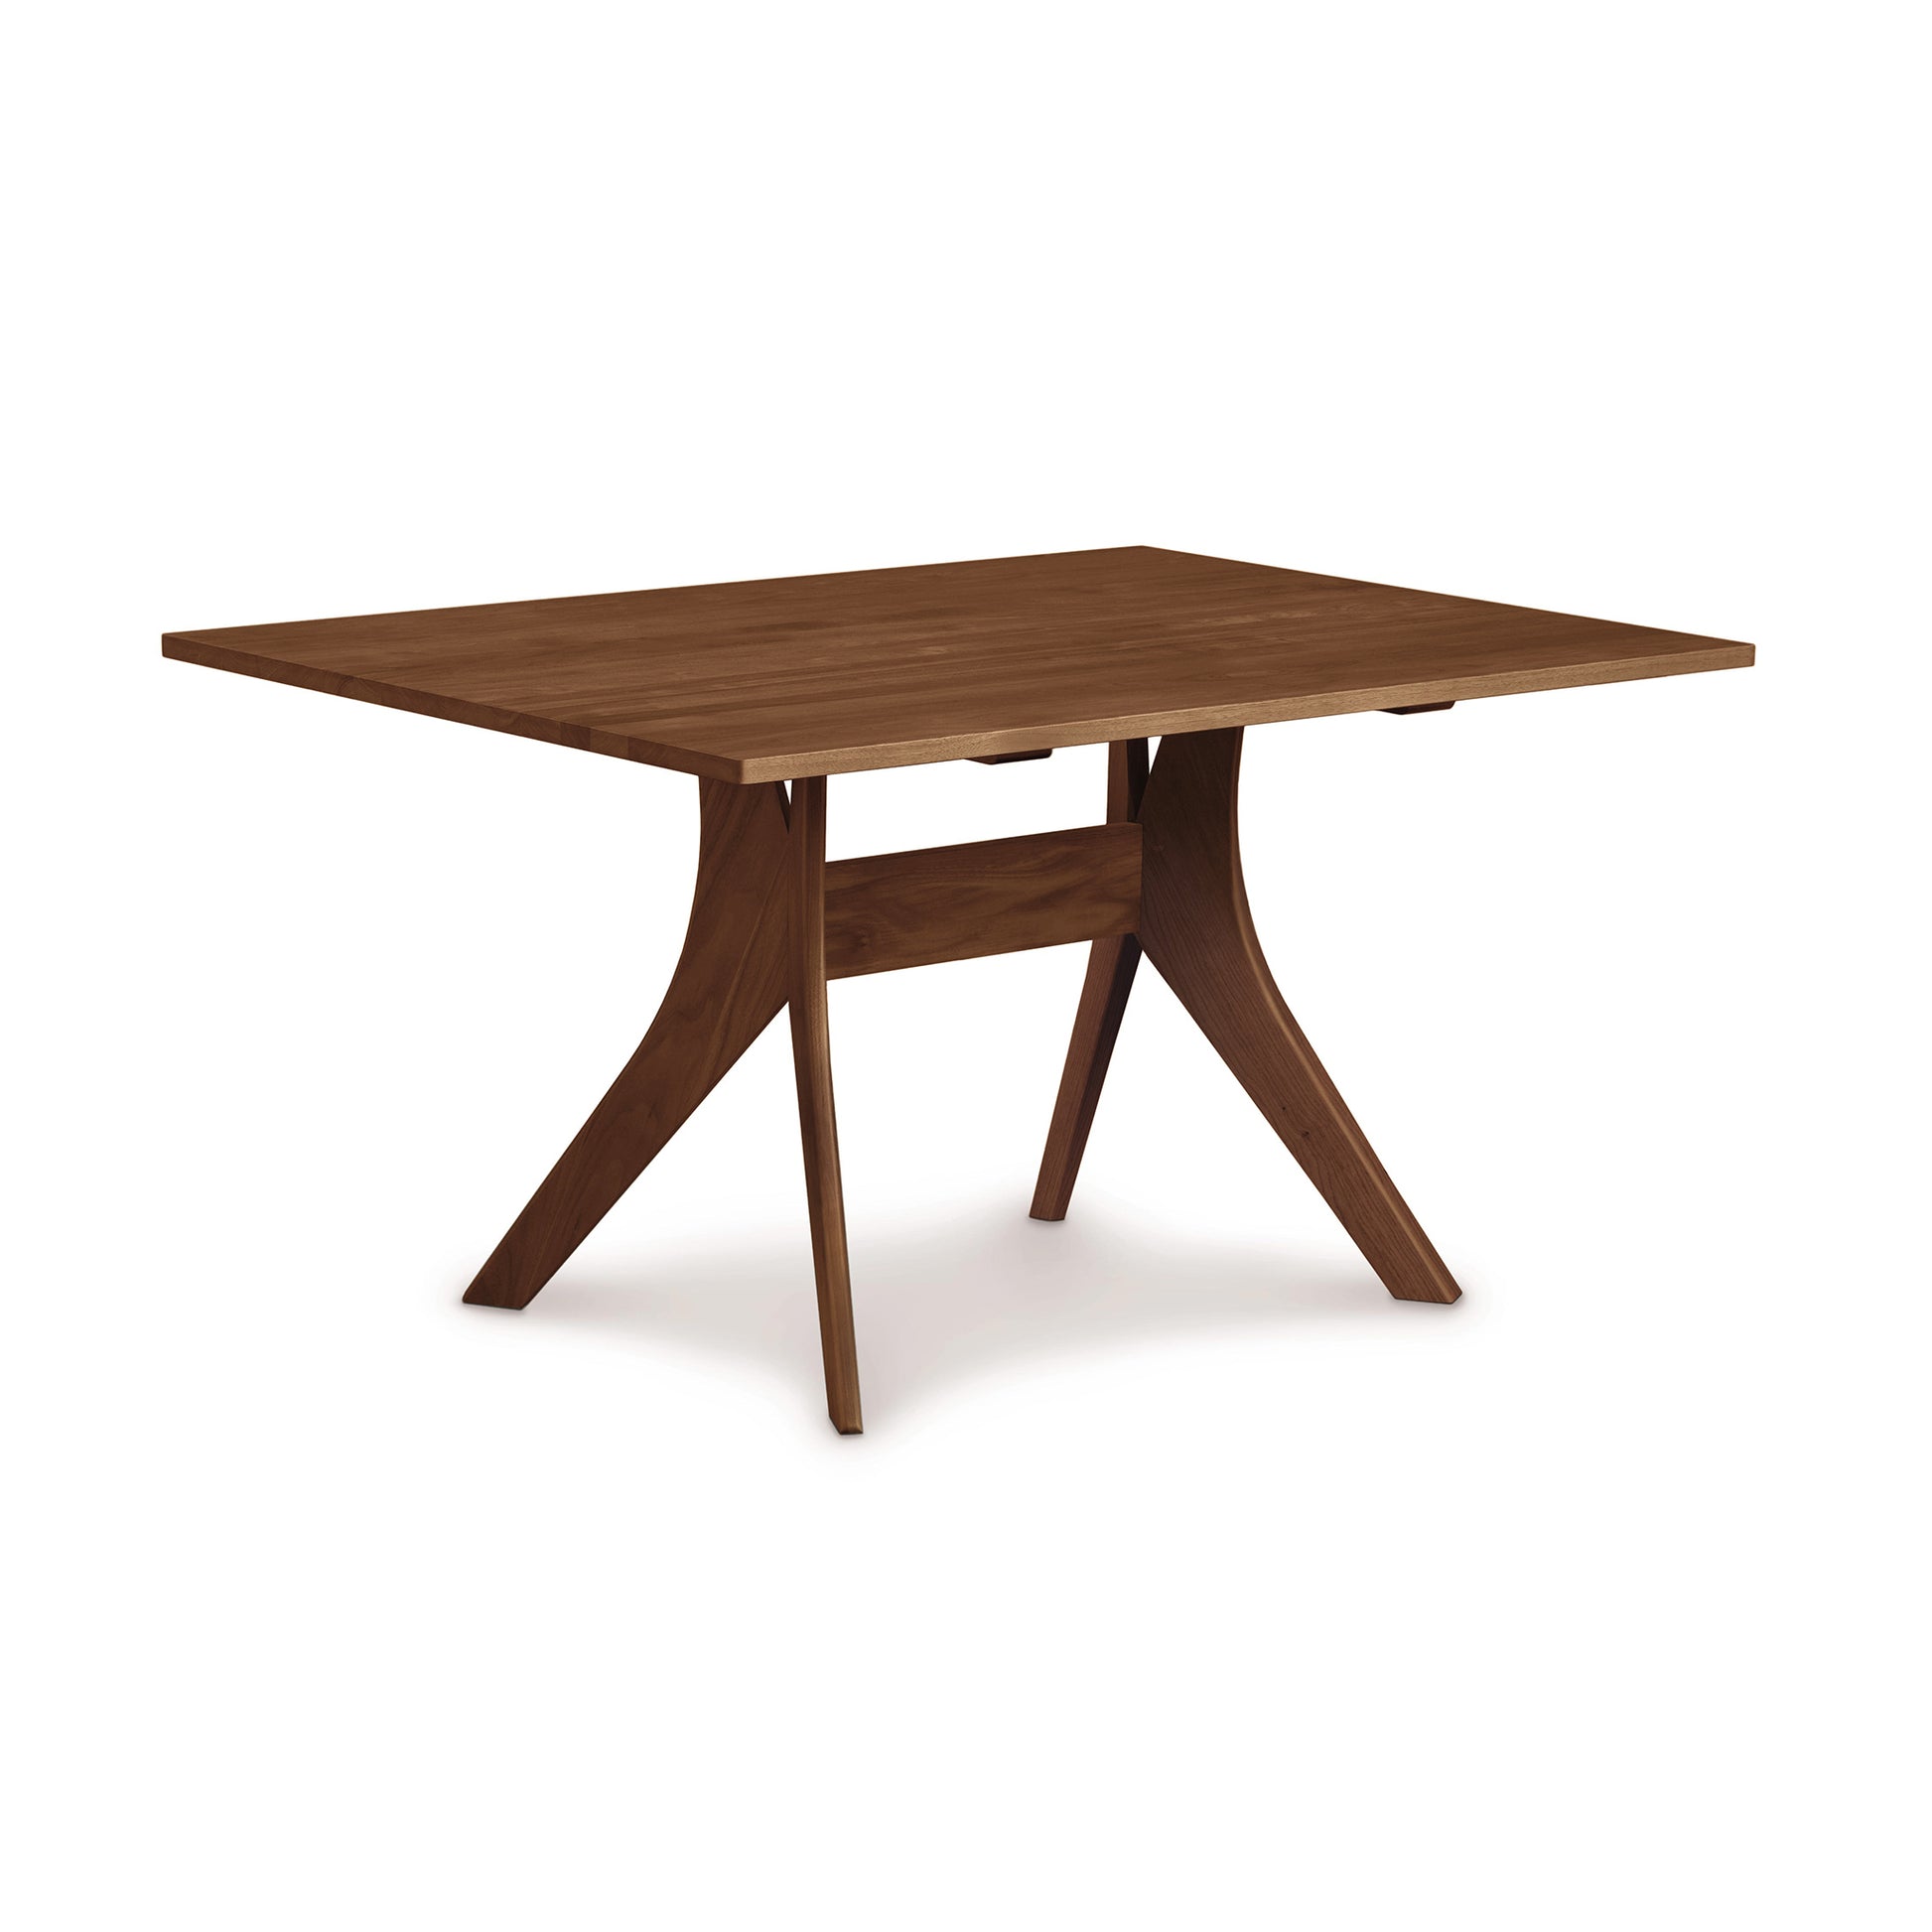 An Audrey Solid Top Dining Table crafted with solid hardwood top and legs by Copeland Furniture.